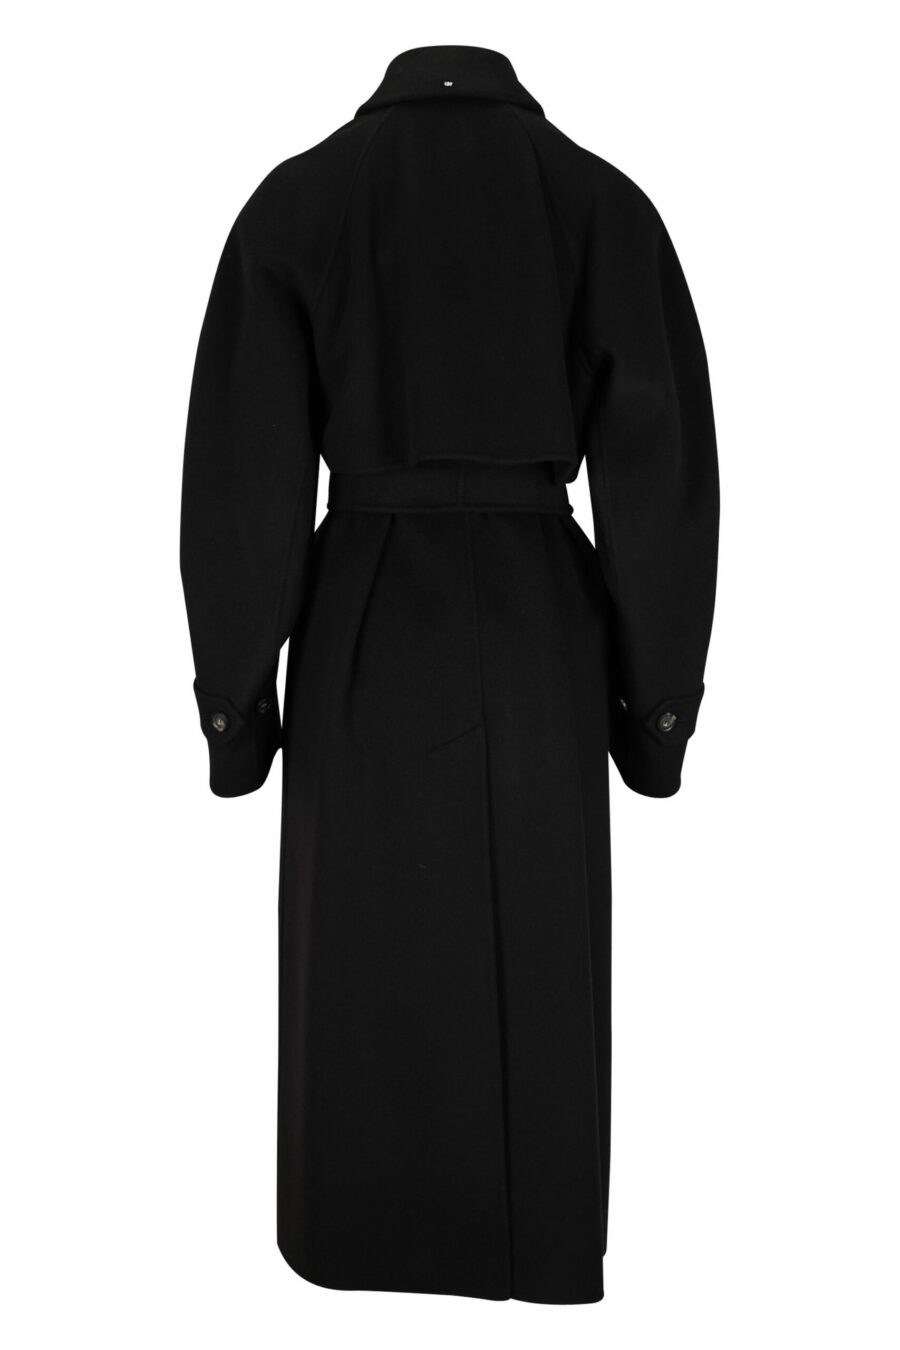 Long black wool and cashmere coat - 20110341060042 2 scaled